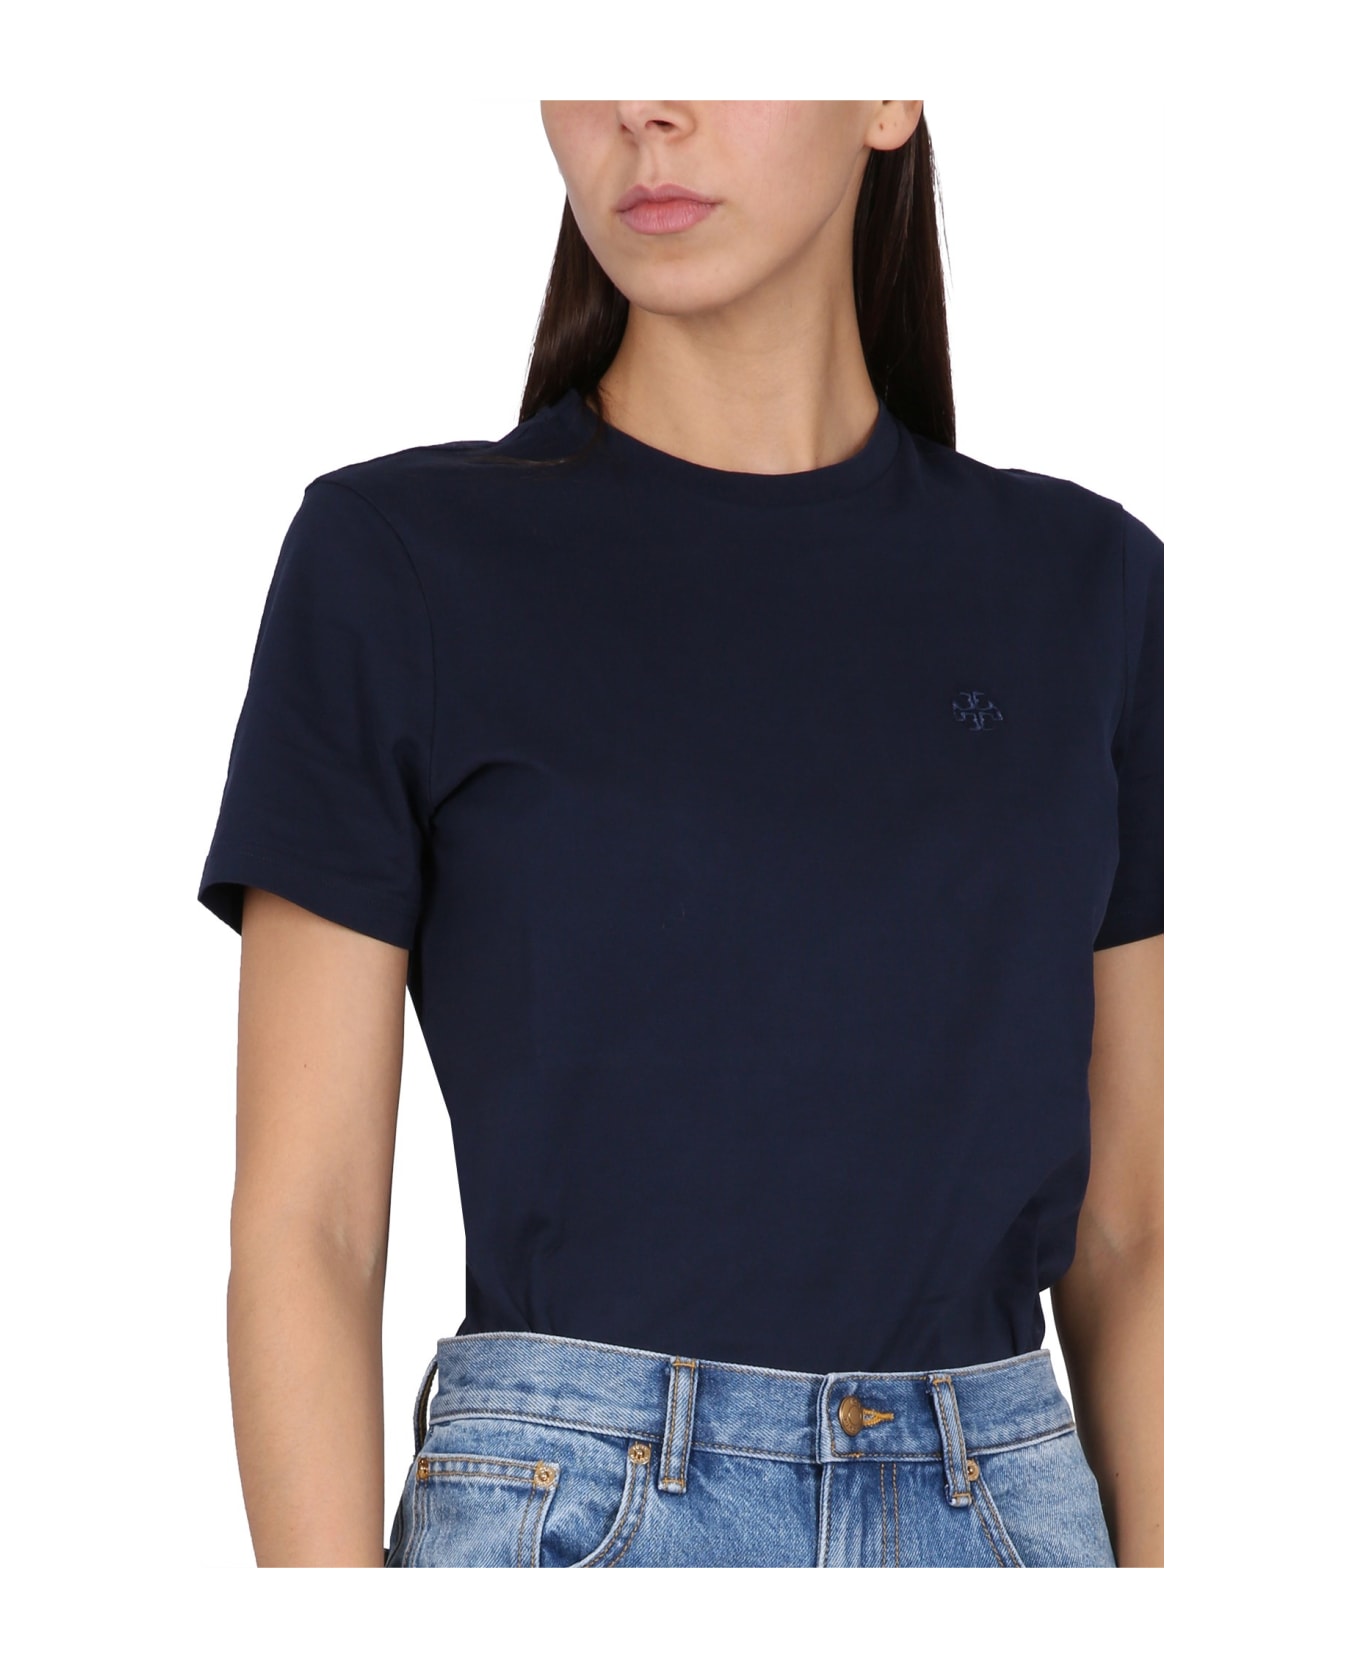 Tory Burch Embroidered Logo T-shirt - BLUE